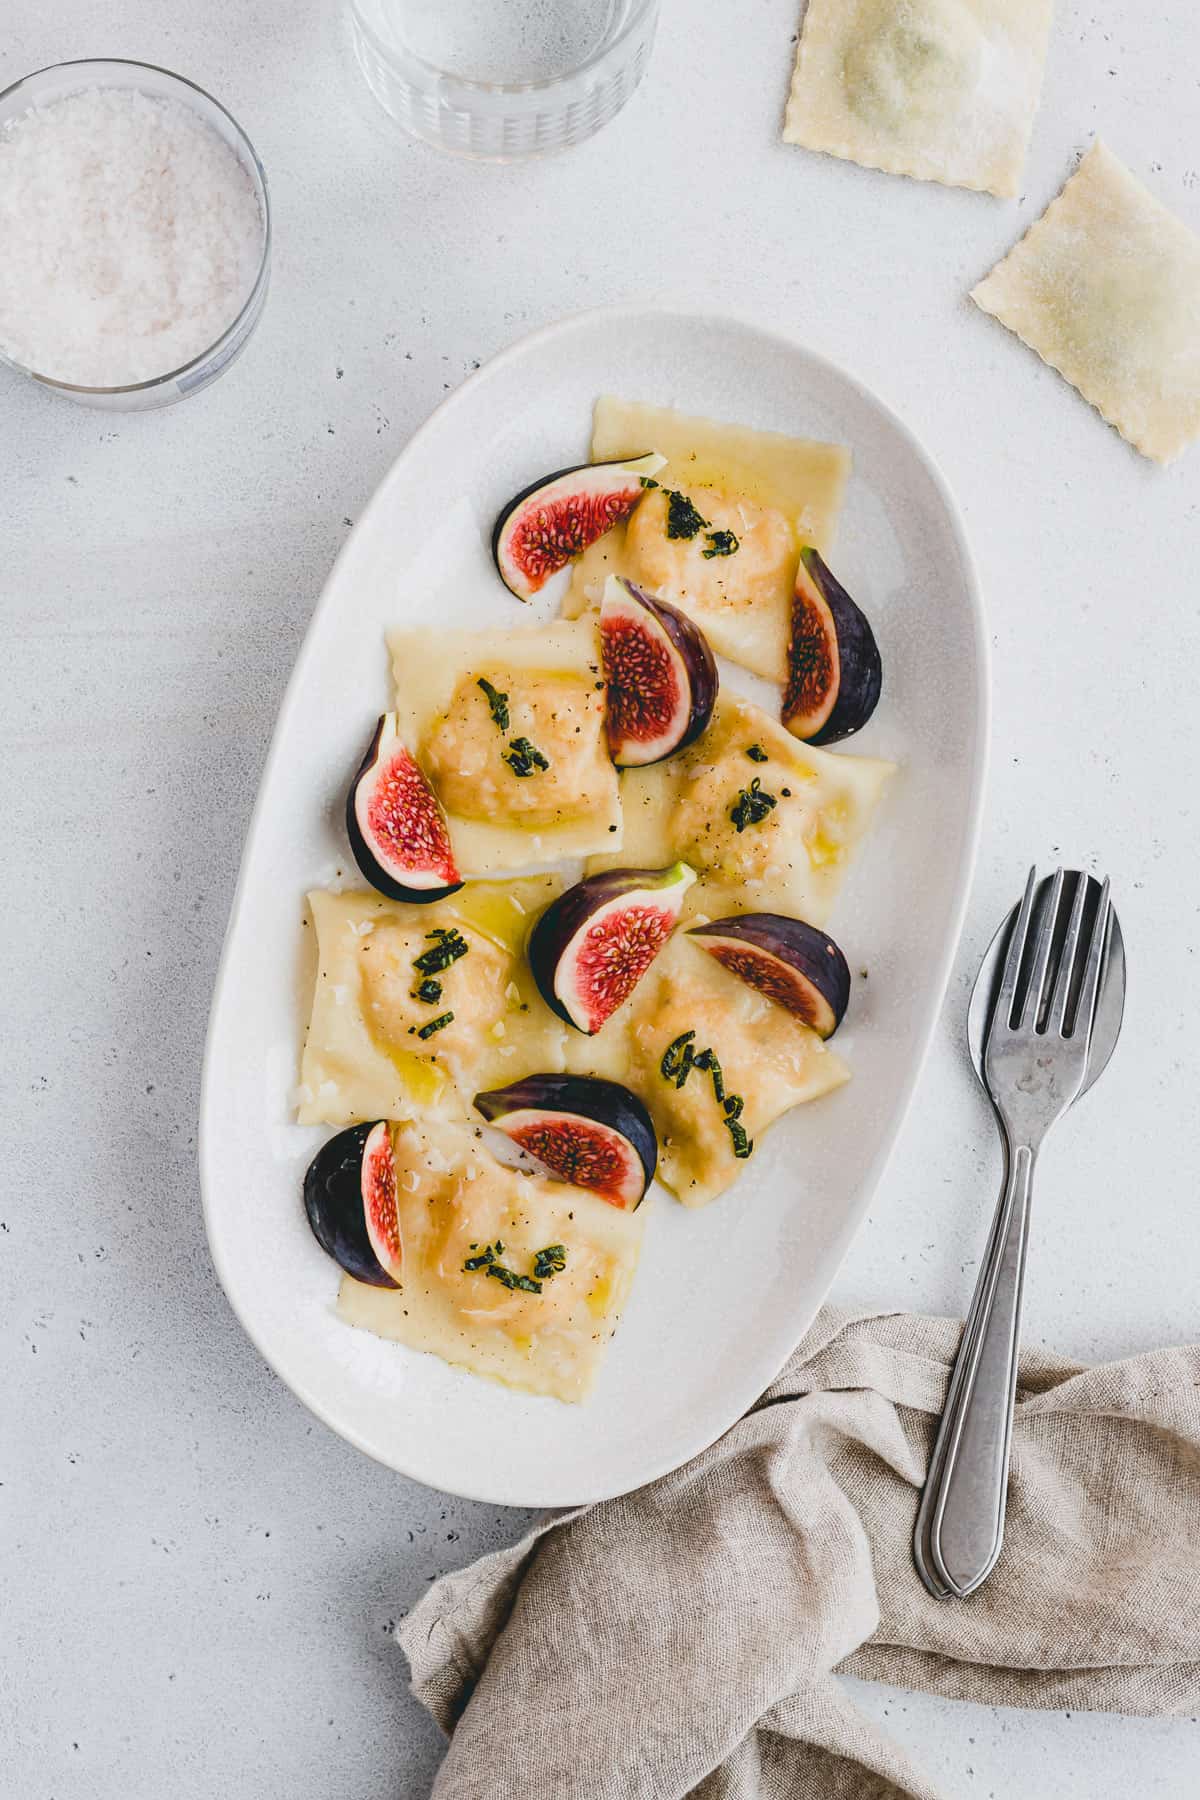 roasted butternut squash ravioli served with figs